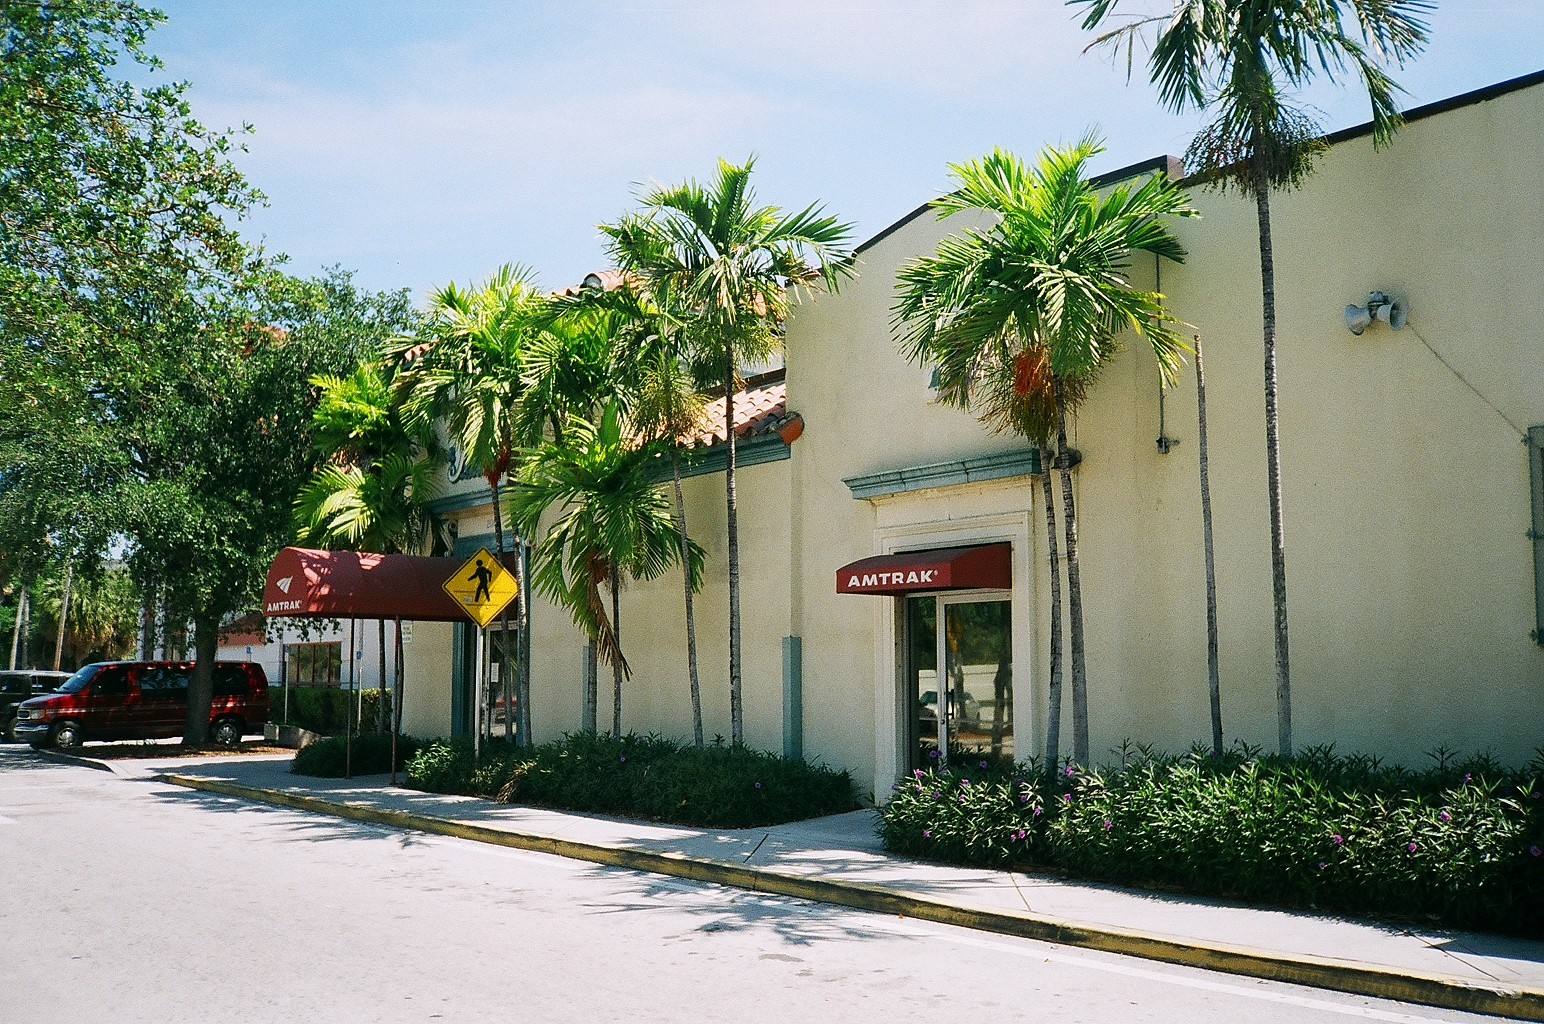 the corner store is located in a tropical area